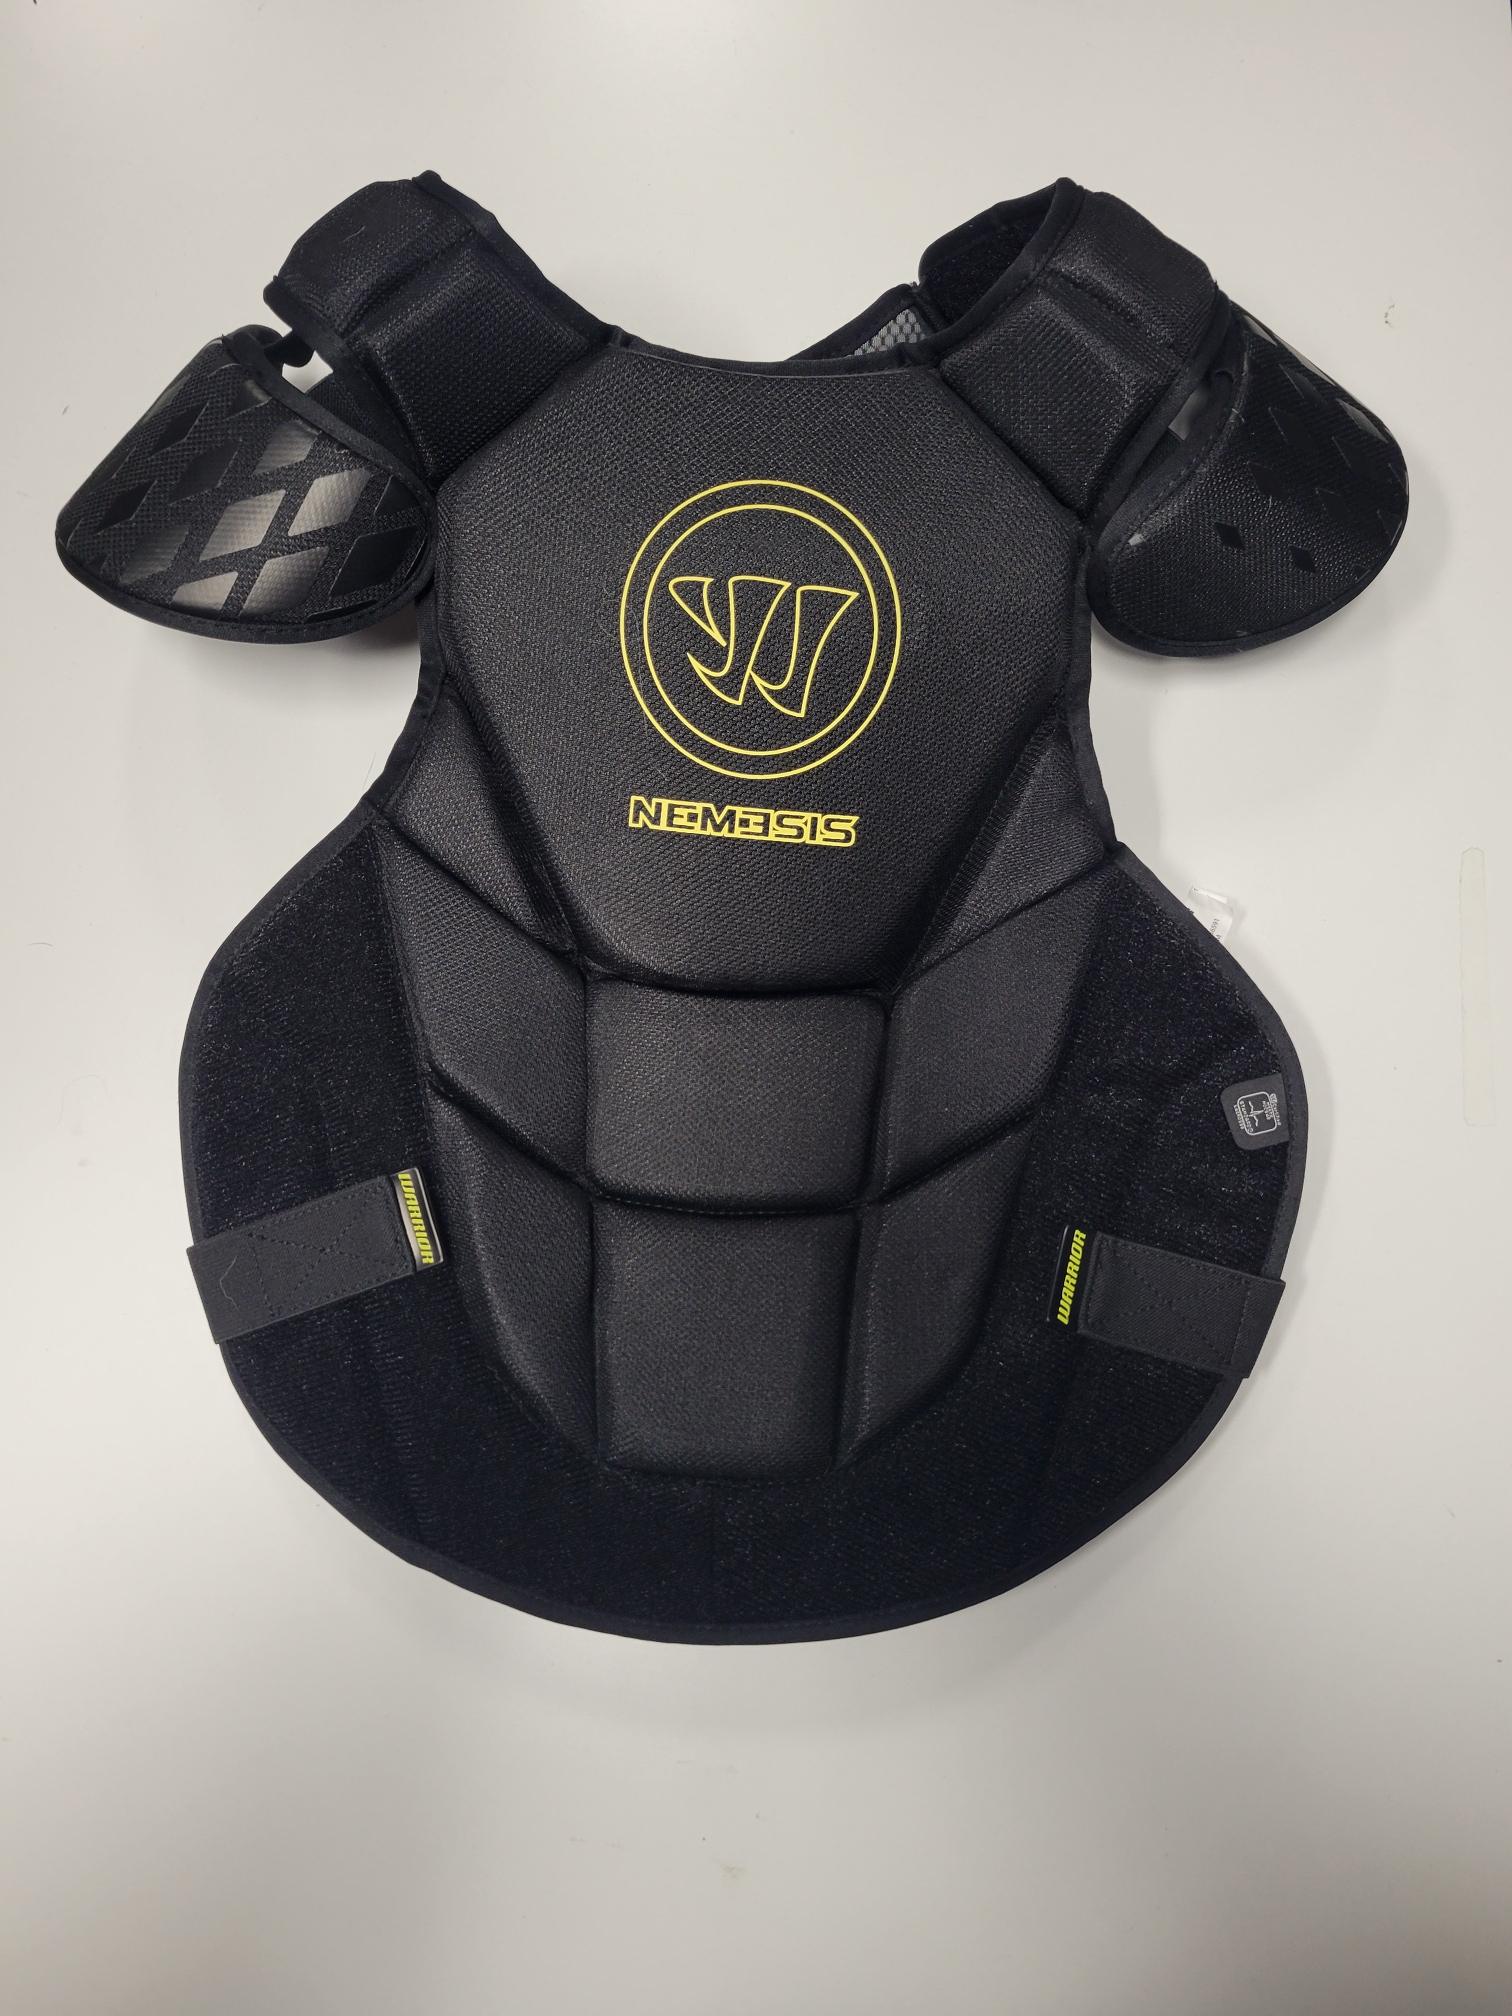 New Large Warrior Nemesis Chest Protector